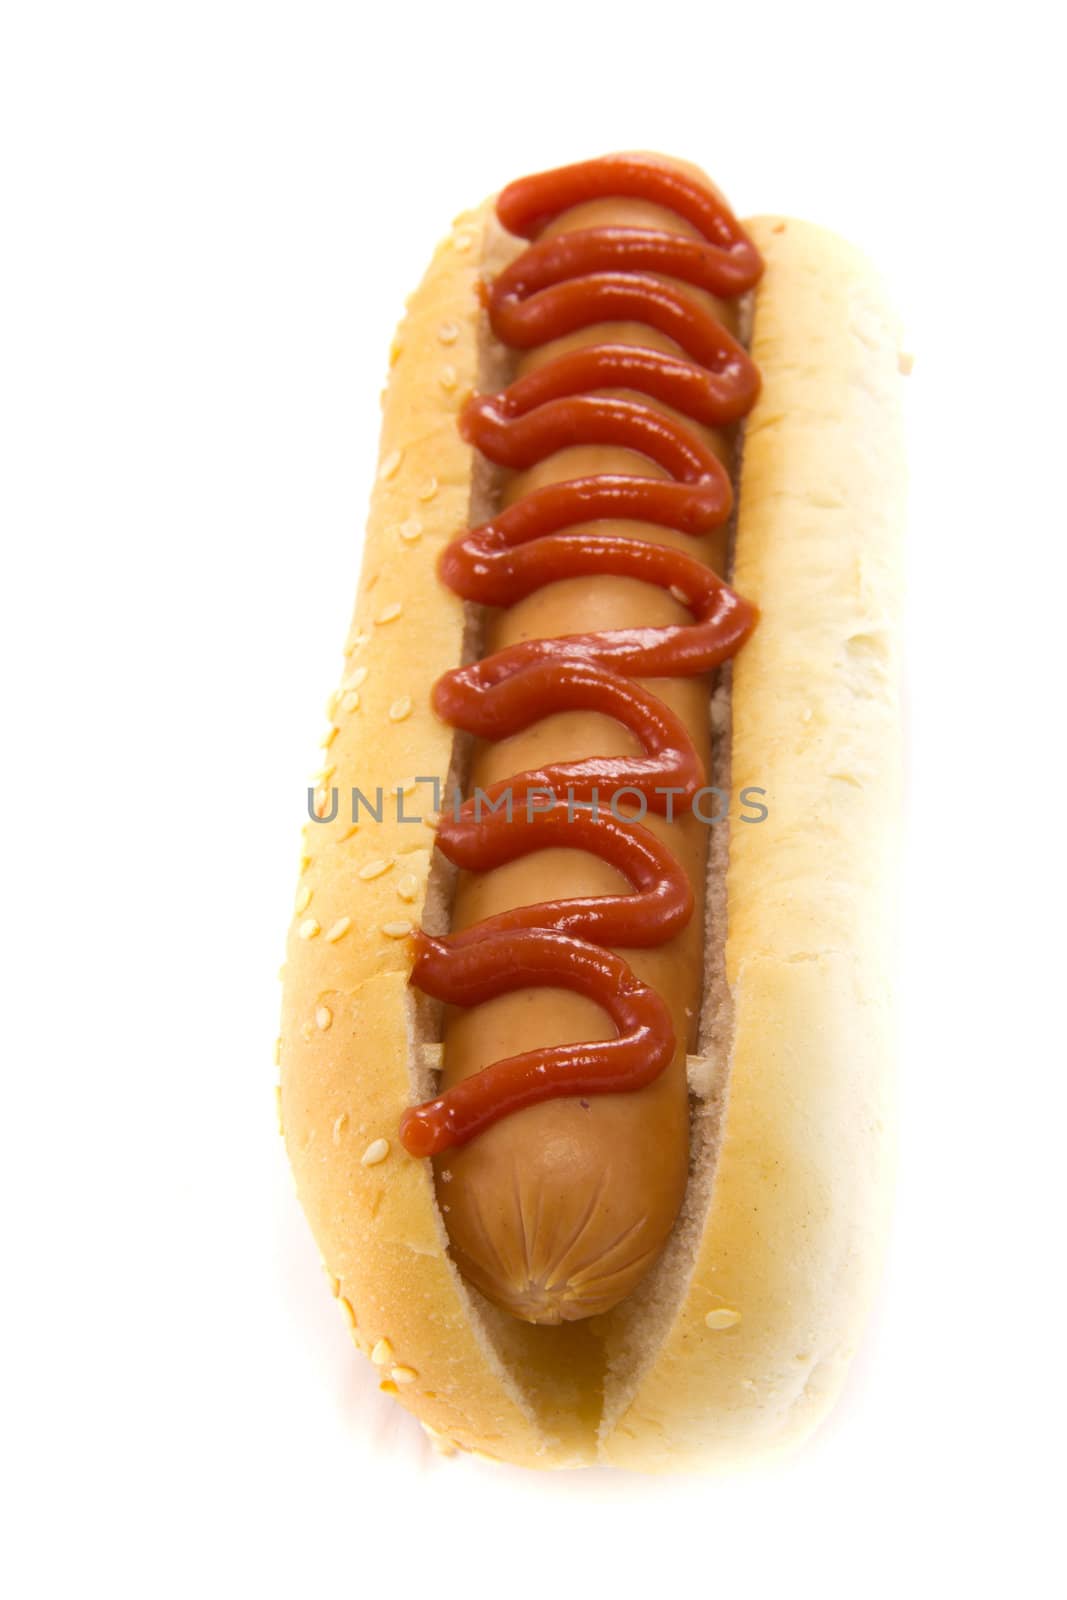 A picture of a hotdog with ketchup on top